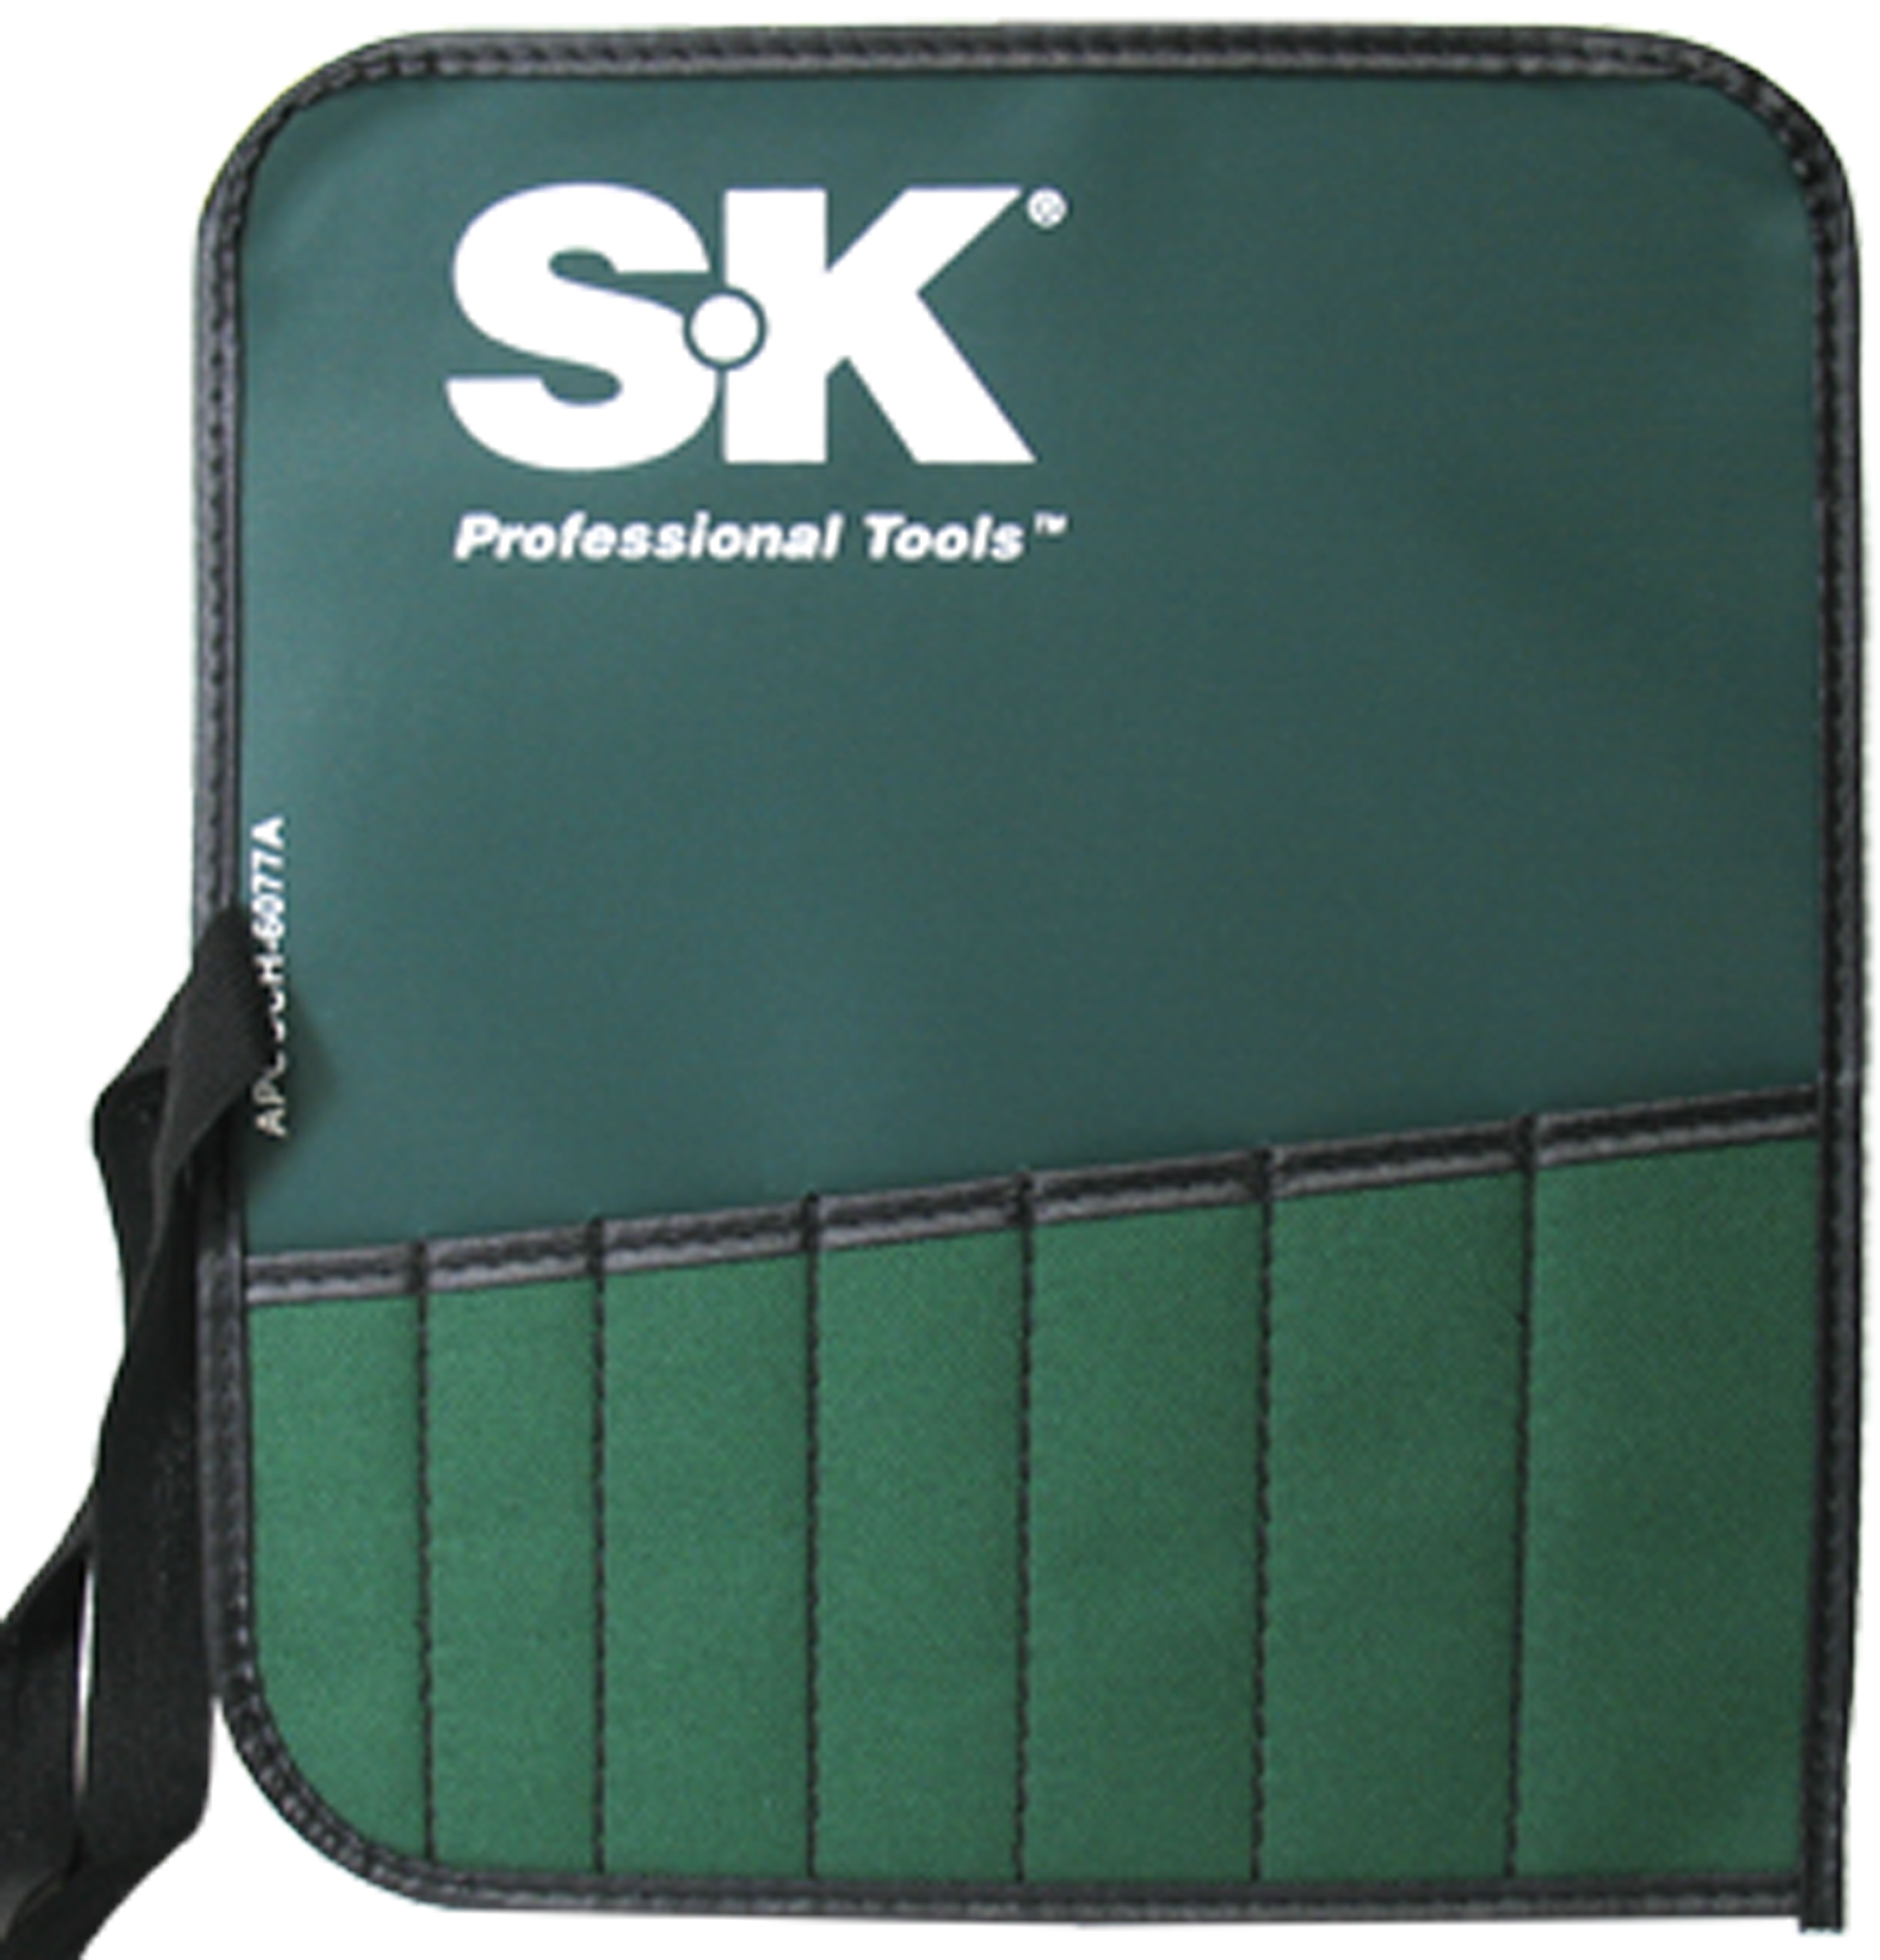 Tool Roll 02 72ppi